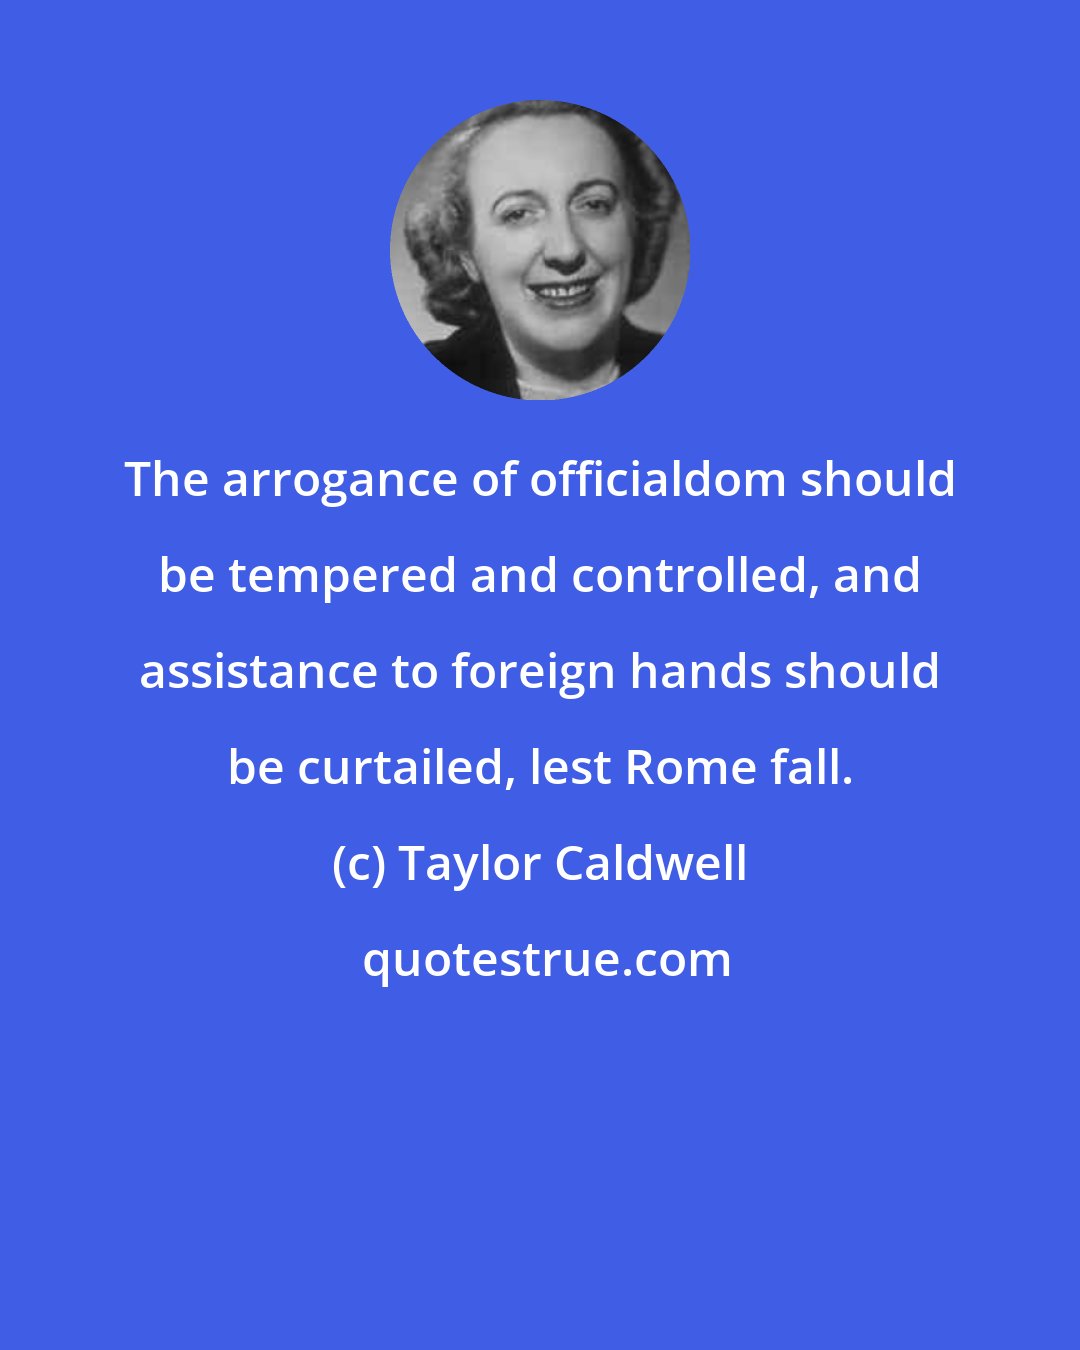 Taylor Caldwell: The arrogance of officialdom should be tempered and controlled, and assistance to foreign hands should be curtailed, lest Rome fall.